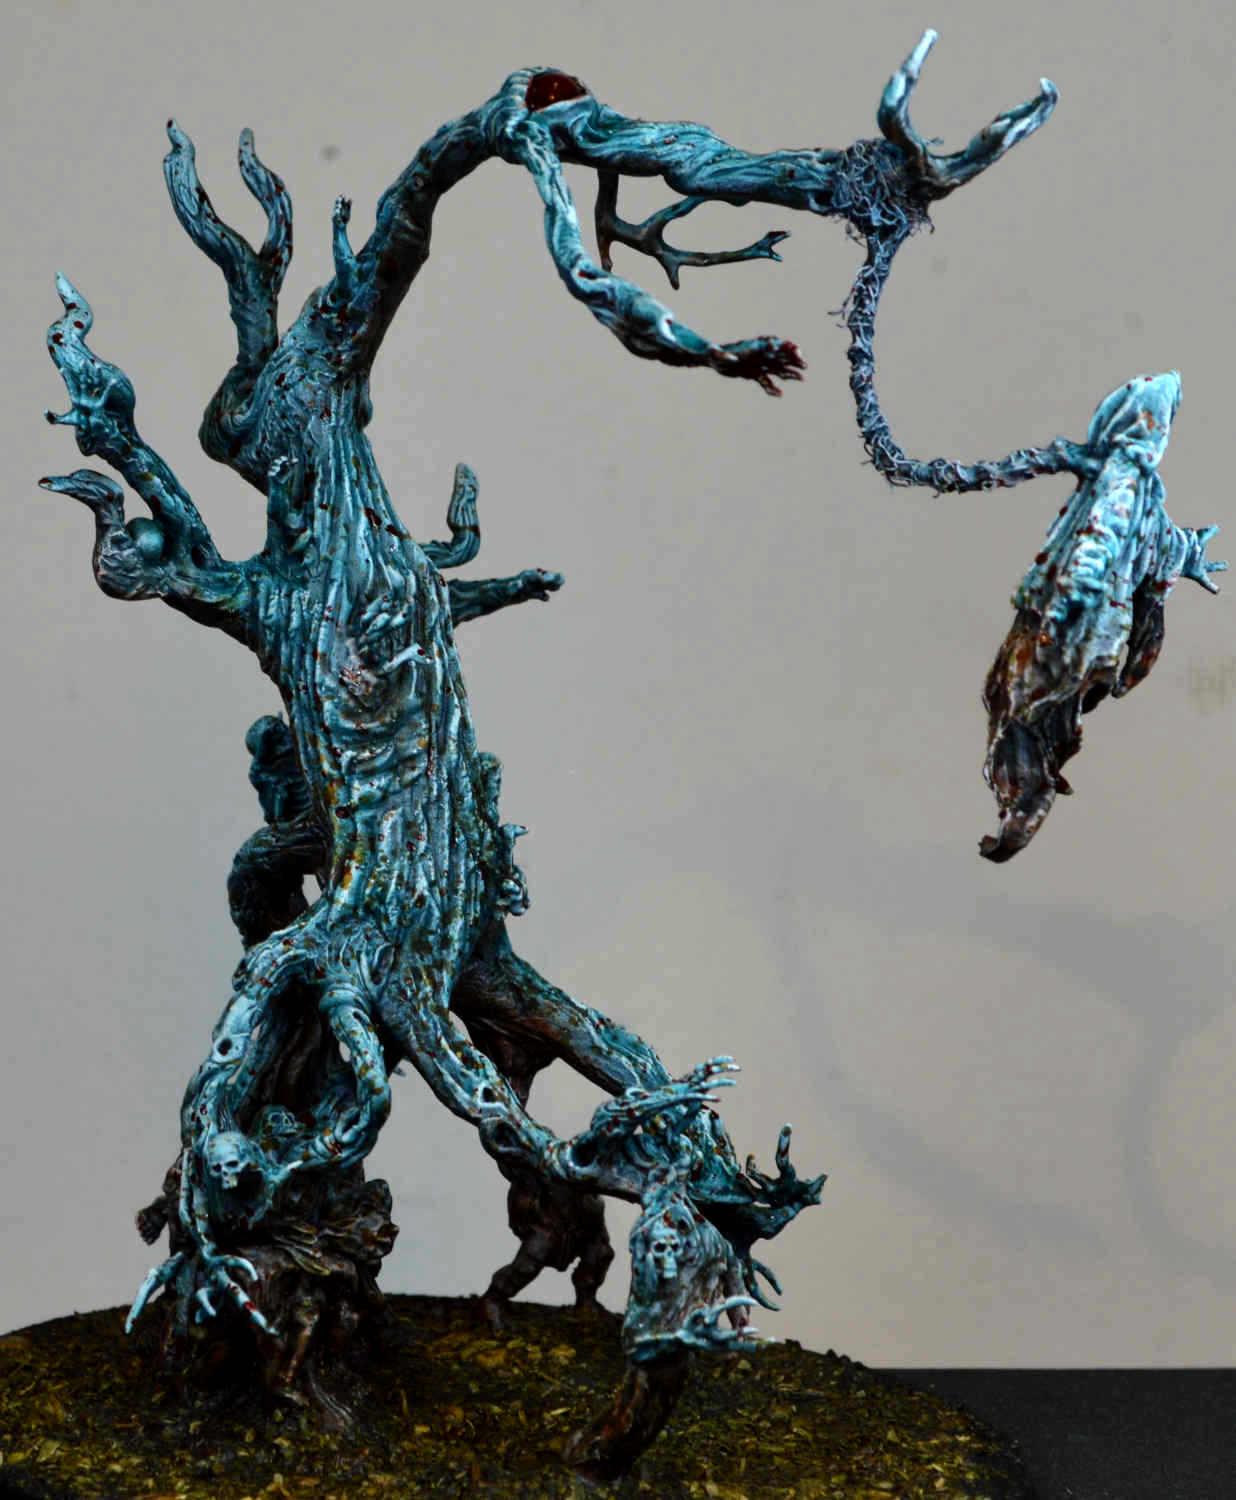 Age Of Sigmar, Deadwalkers, Do-it-yourself, Gravelords, Horde, Mortis Engine, Proxy, Scratch Build, Soulblight, Undead, Vampire, Vyrkos, Warhammer Fantasy